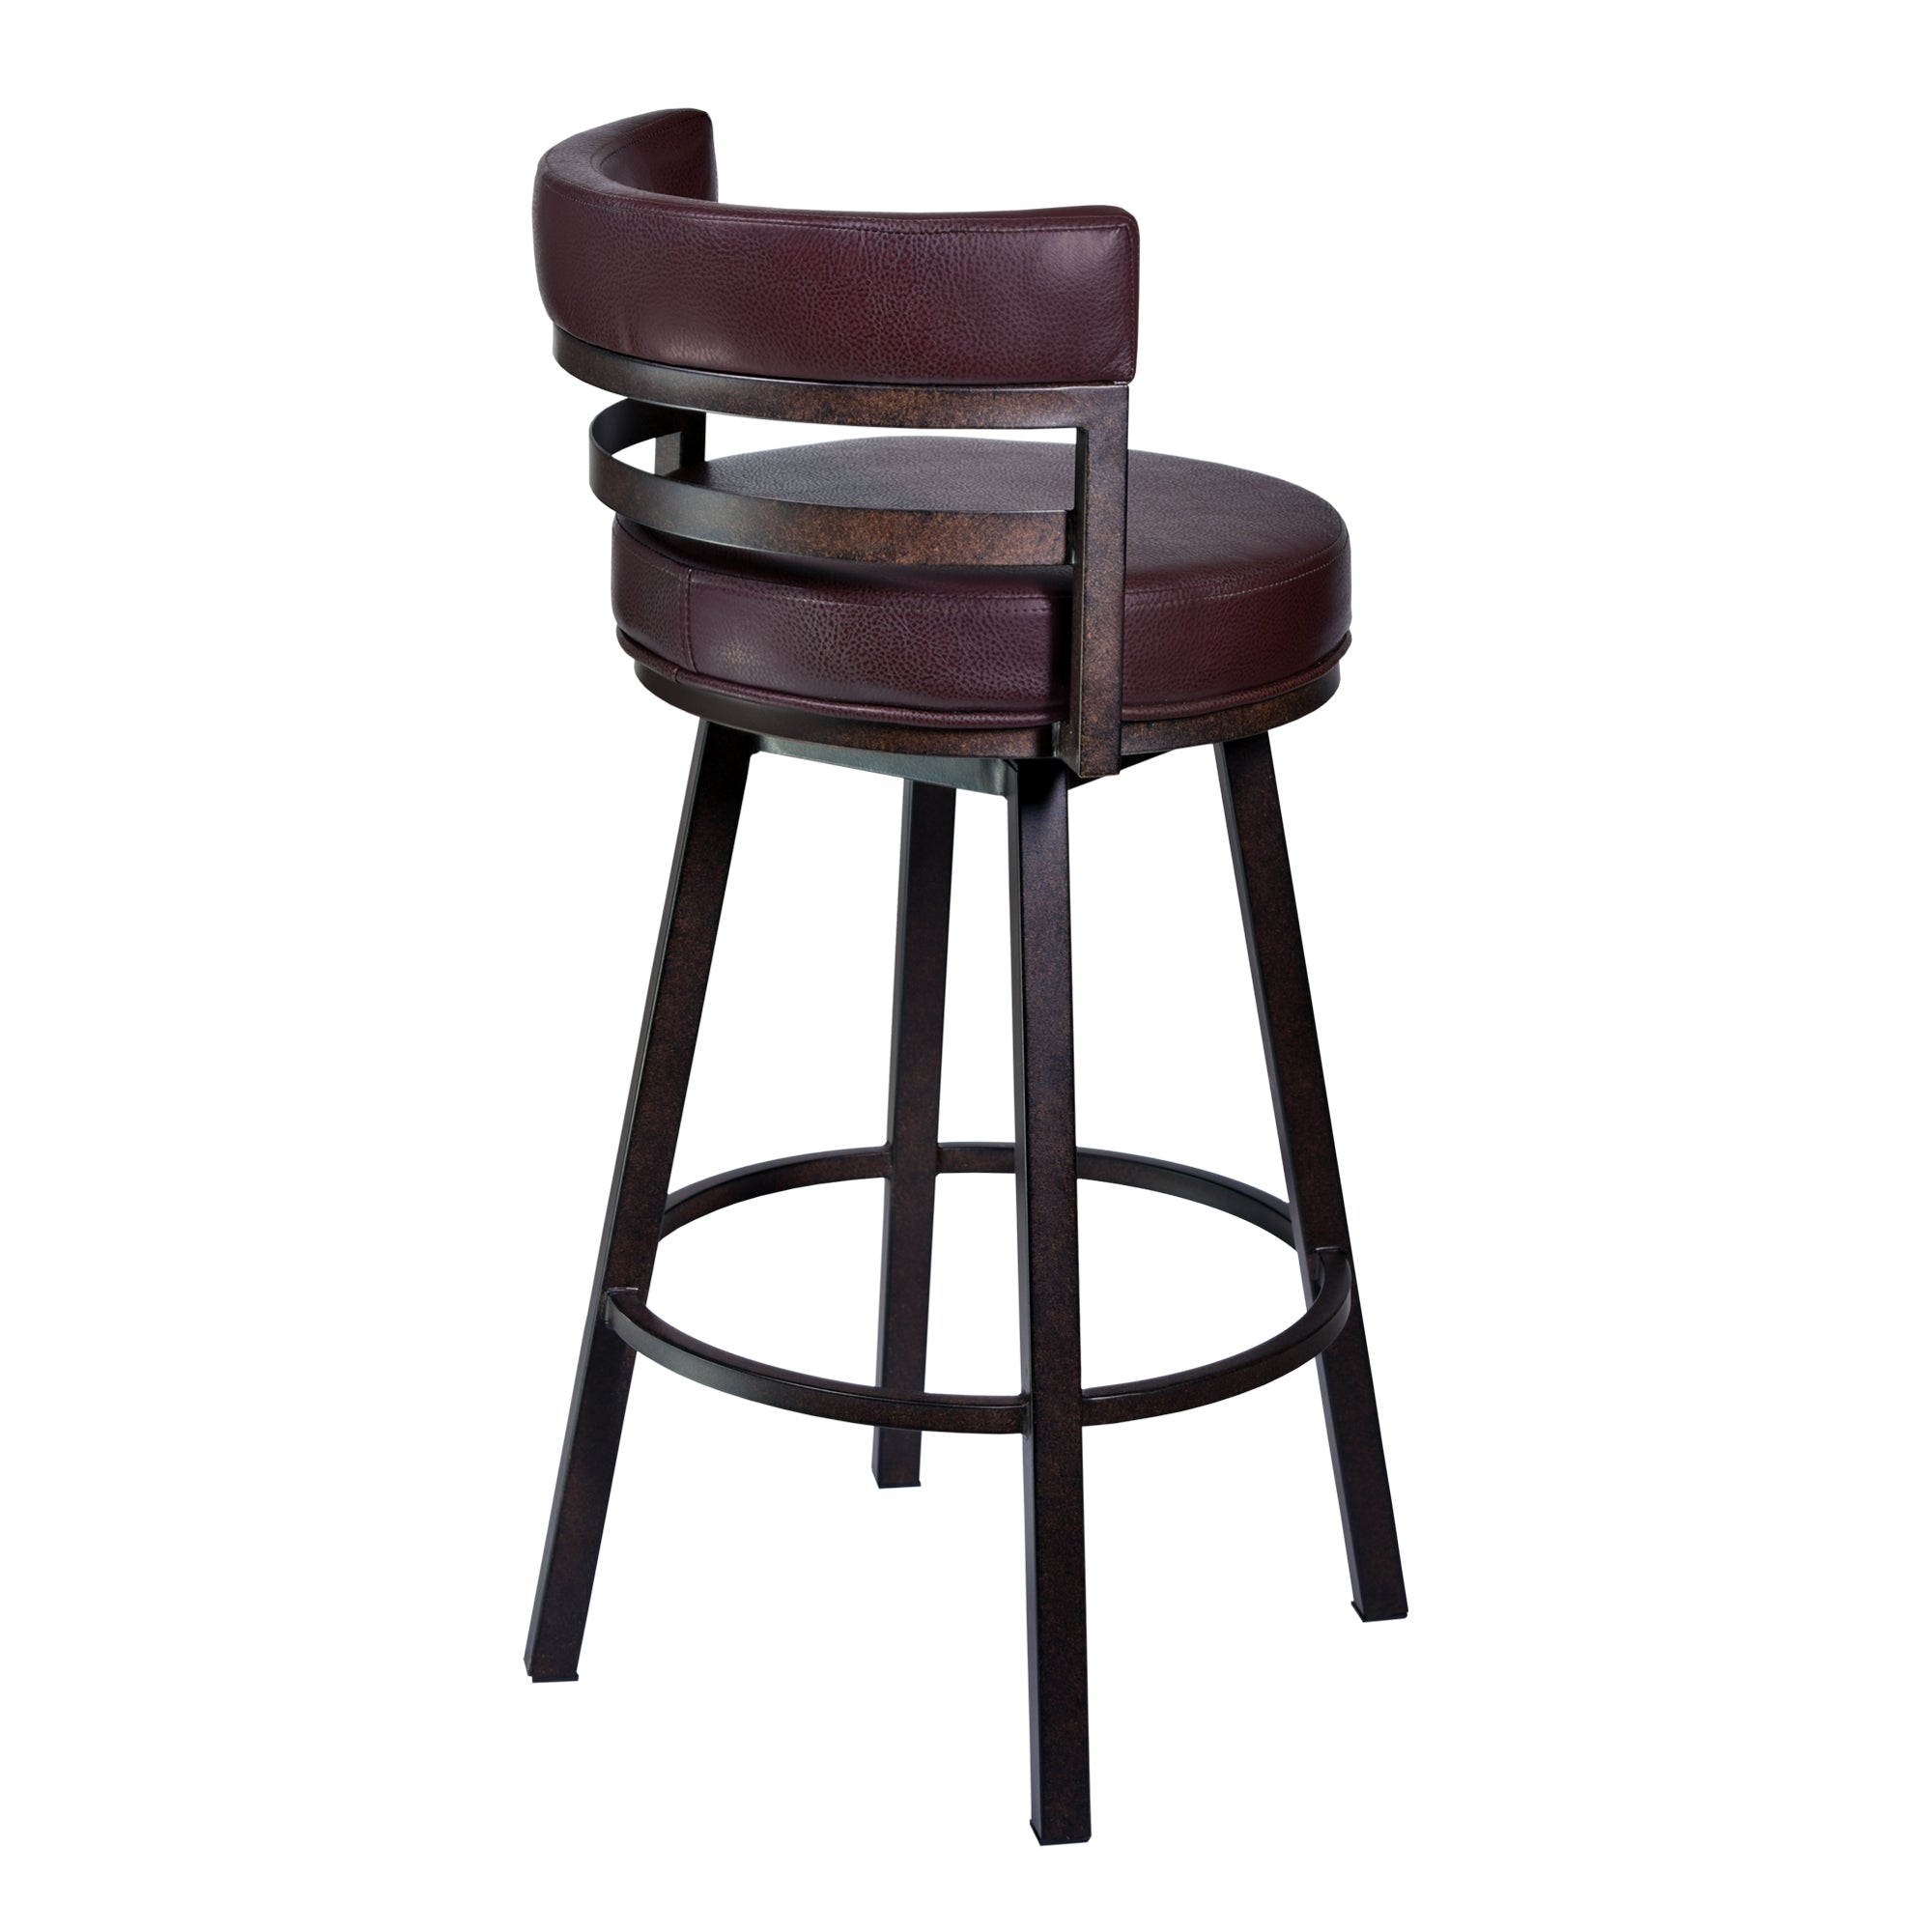 Madrid Counter Stool or Barstool in Auburn Bay finish with Brown PU upholstery